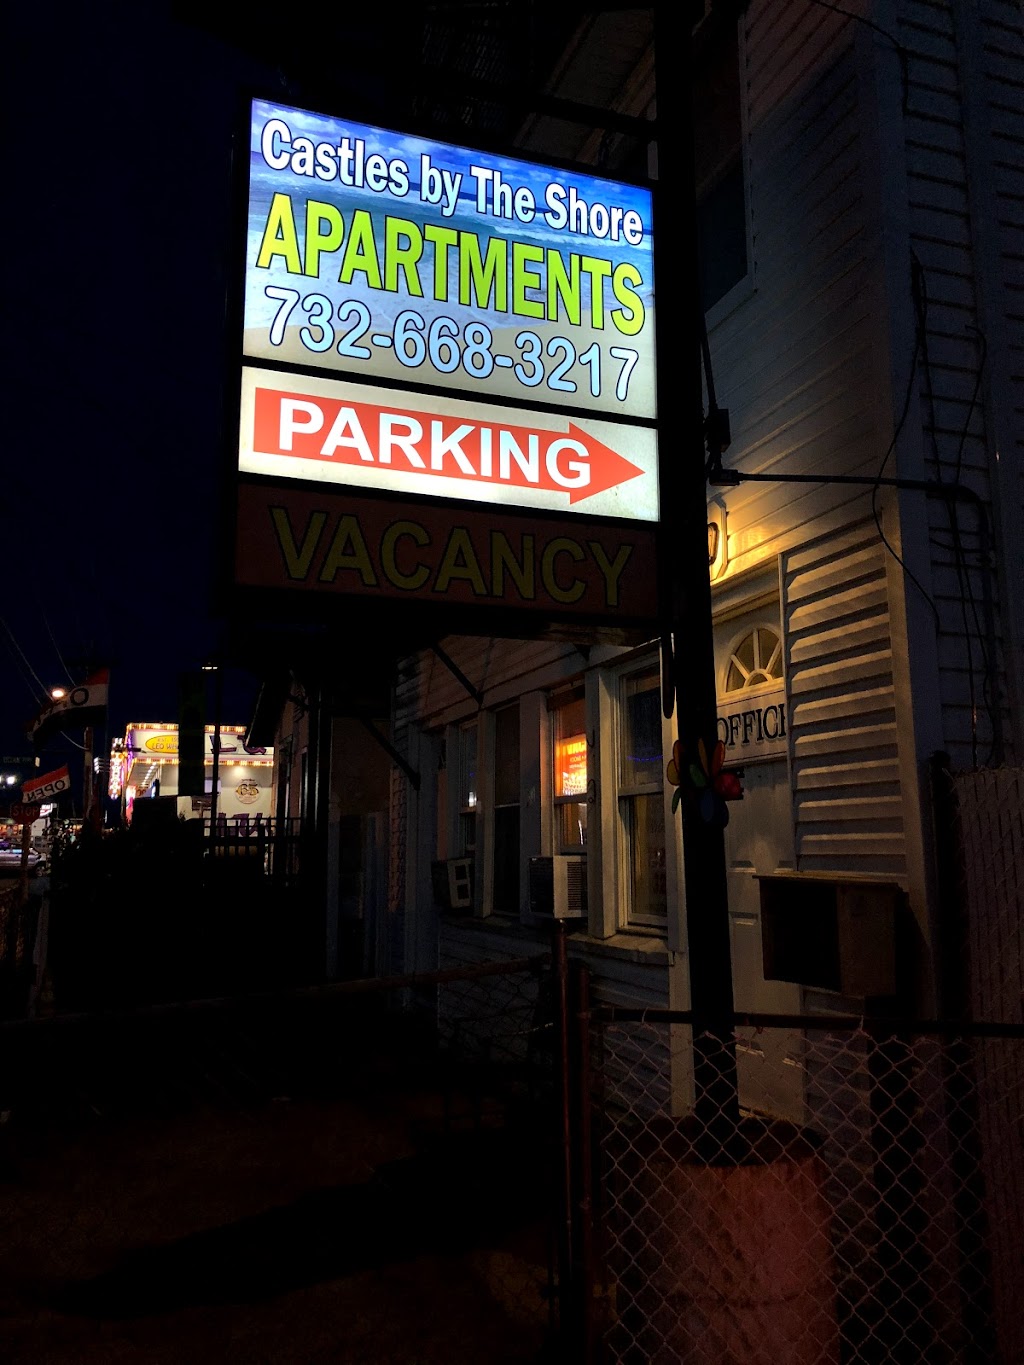 Castles by the shore | 23 Hamilton Ave, Seaside Heights, NJ 08751 | Phone: (732) 668-3217